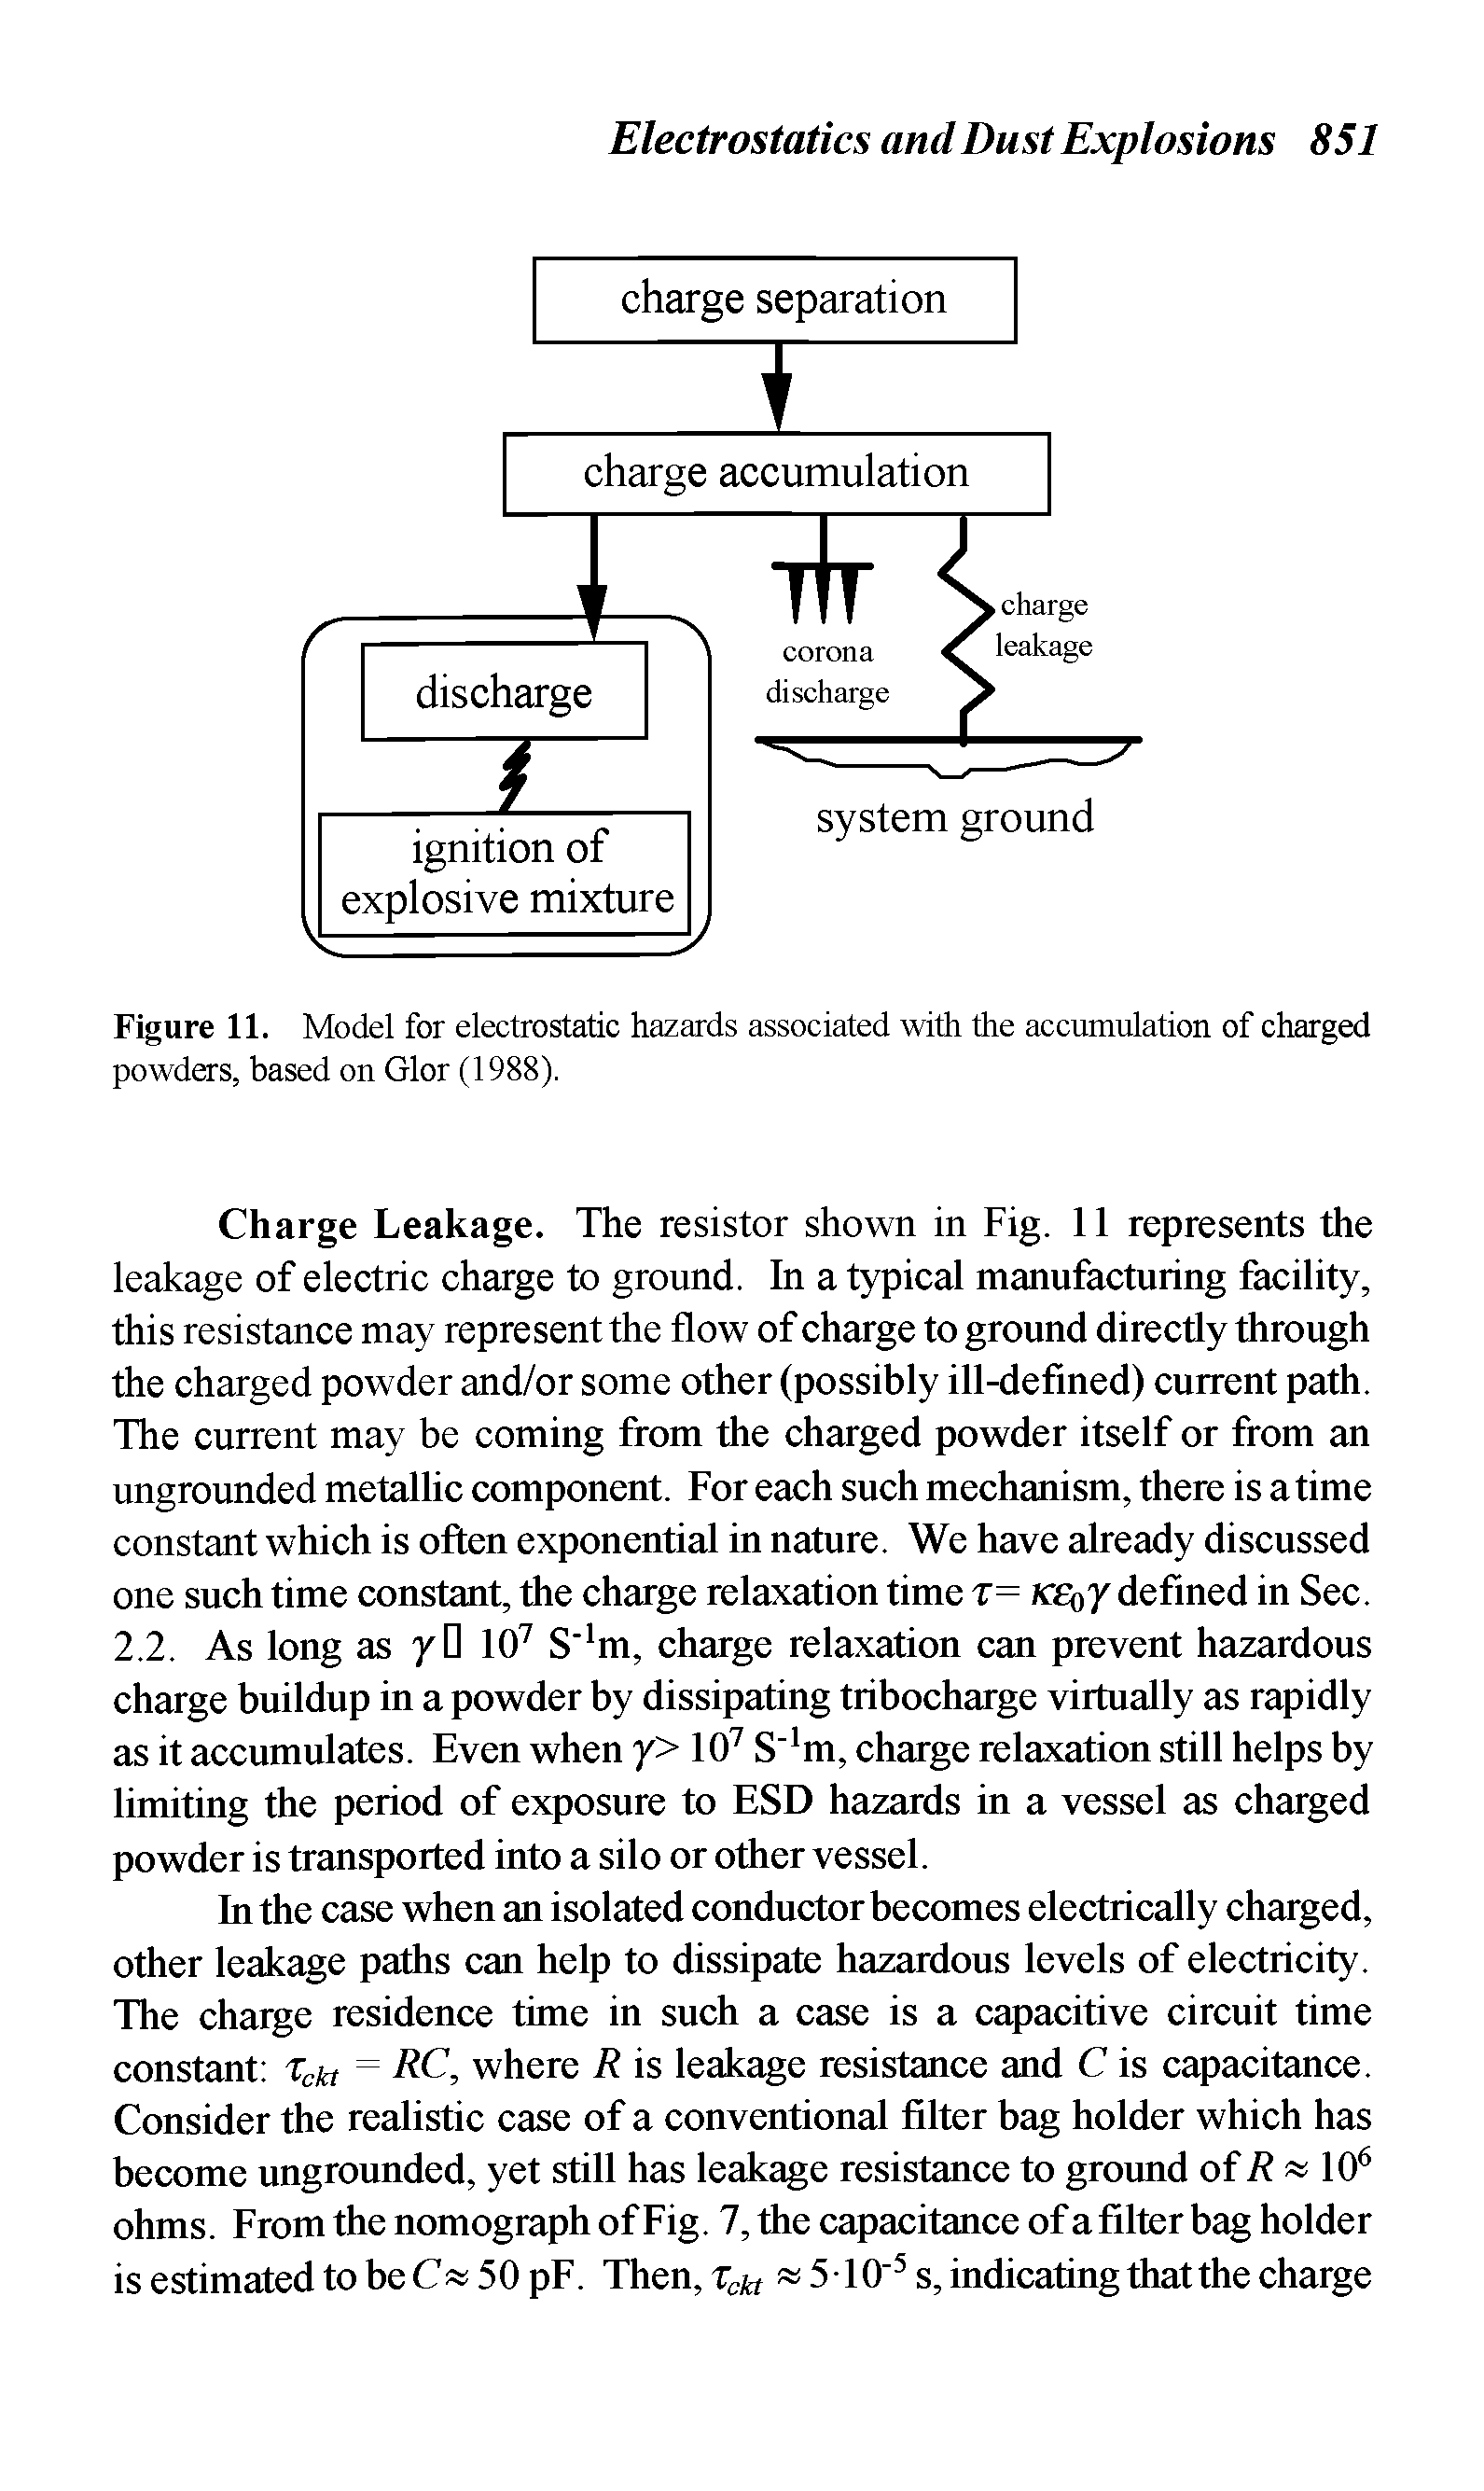 Figure 11. Model for electrostatic hazards associated with the accumulation of charged powders, based on Glor (1988).